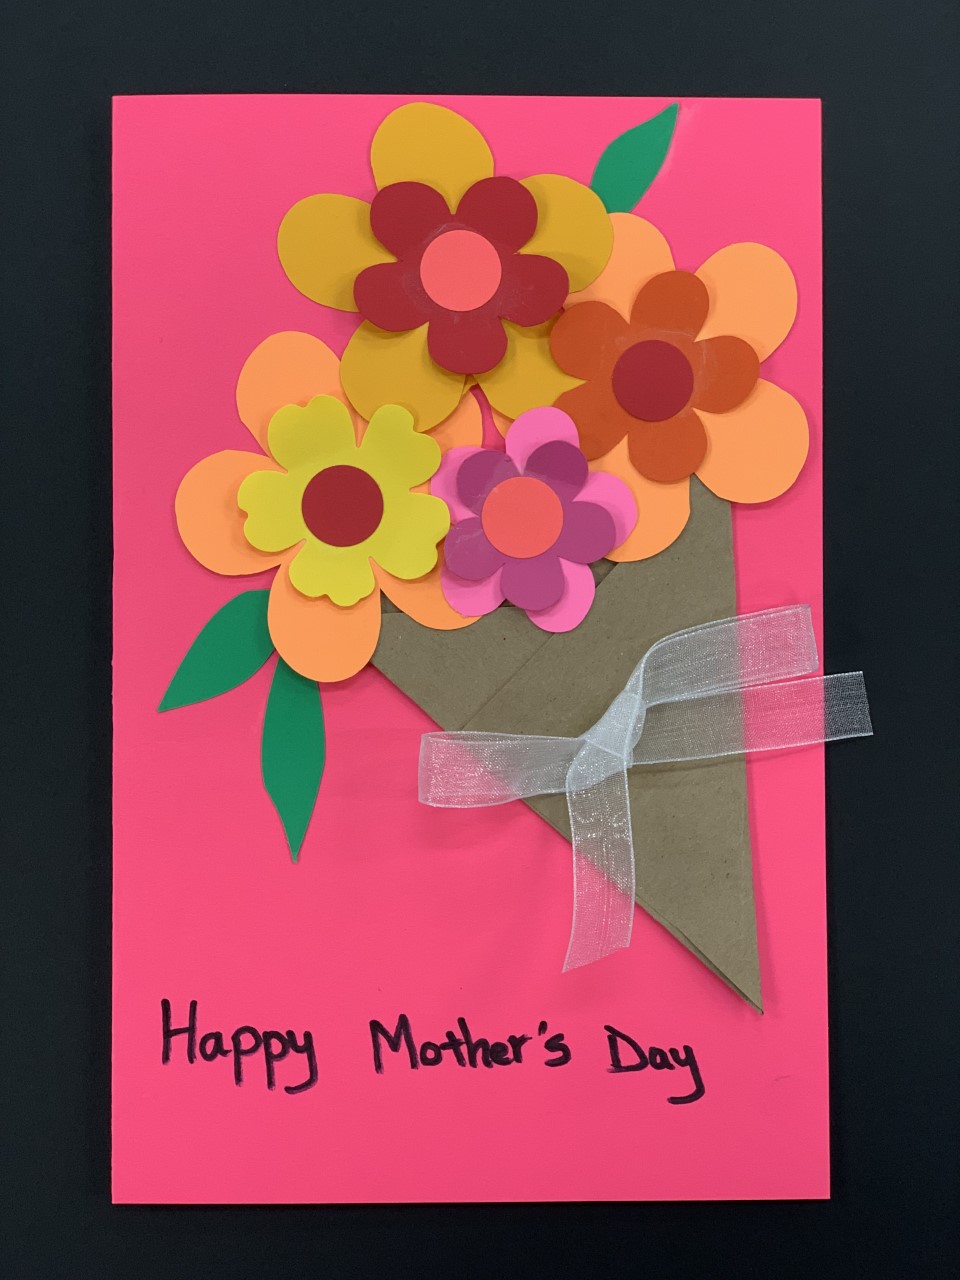 MOTHER'S DAY, STORYTIME, ARTS AND CRAFTS